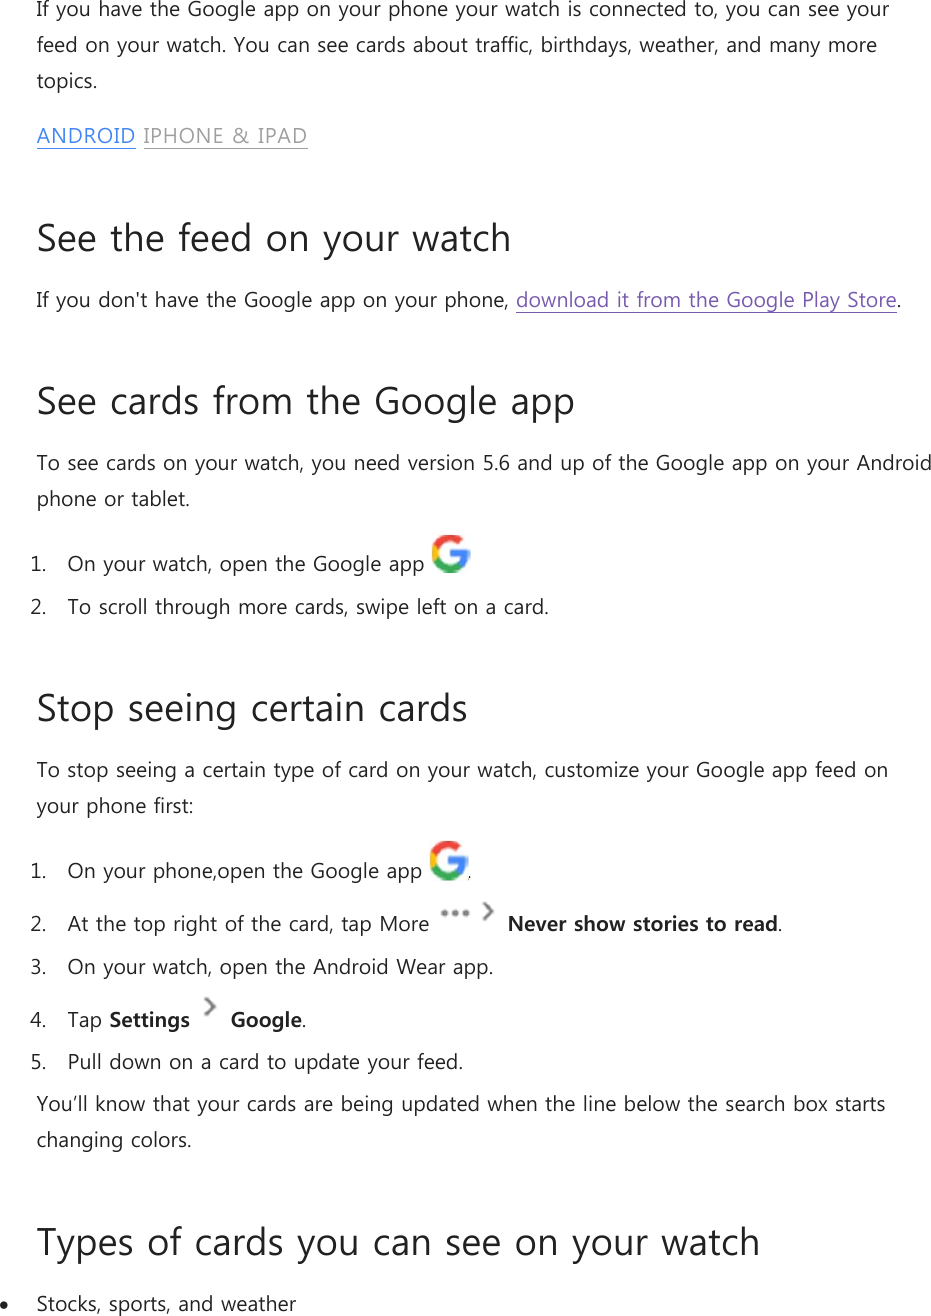 If you have the Google app on your phone your watch is connected to, you can see your feed on your watch. You can see cards about traffic, birthdays, weather, and many more topics. ANDROID IPHONE &amp; IPAD See the feed on your watch If you don&apos;t have the Google app on your phone, download it from the Google Play Store. See cards from the Google app To see cards on your watch, you need version 5.6 and up of the Google app on your Android phone or tablet. 1. On your watch, open the Google app    2. To scroll through more cards, swipe left on a card. Stop seeing certain cards To stop seeing a certain type of card on your watch, customize your Google app feed on your phone first: 1. On your phone,open the Google app  . 2. At the top right of the card, tap More   Never show stories to read. 3. On your watch, open the Android Wear app. 4. Tap Settings  Google. 5. Pull down on a card to update your feed. You’ll know that your cards are being updated when the line below the search box starts changing colors. Types of cards you can see on your watch  Stocks, sports, and weather 